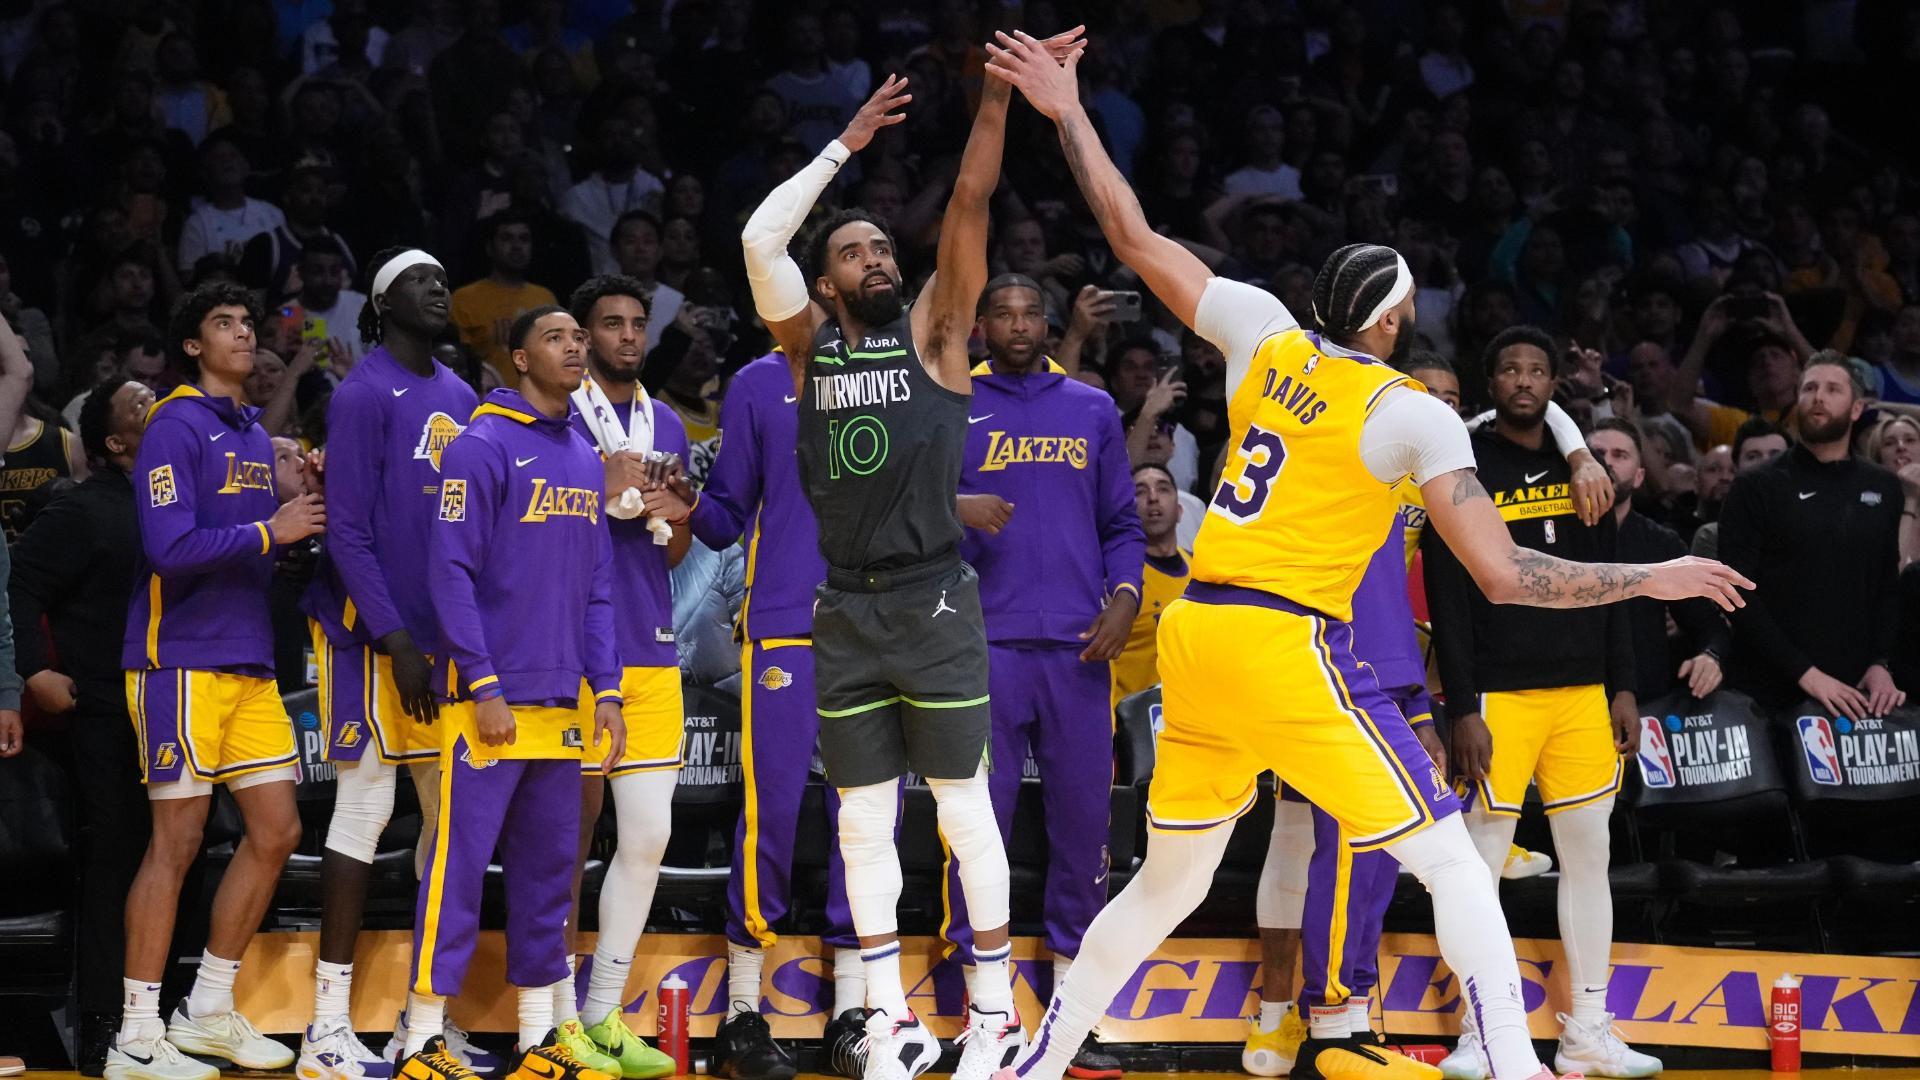 Lakers outlast Wolves 108-102 in OT, advance to face Memphis